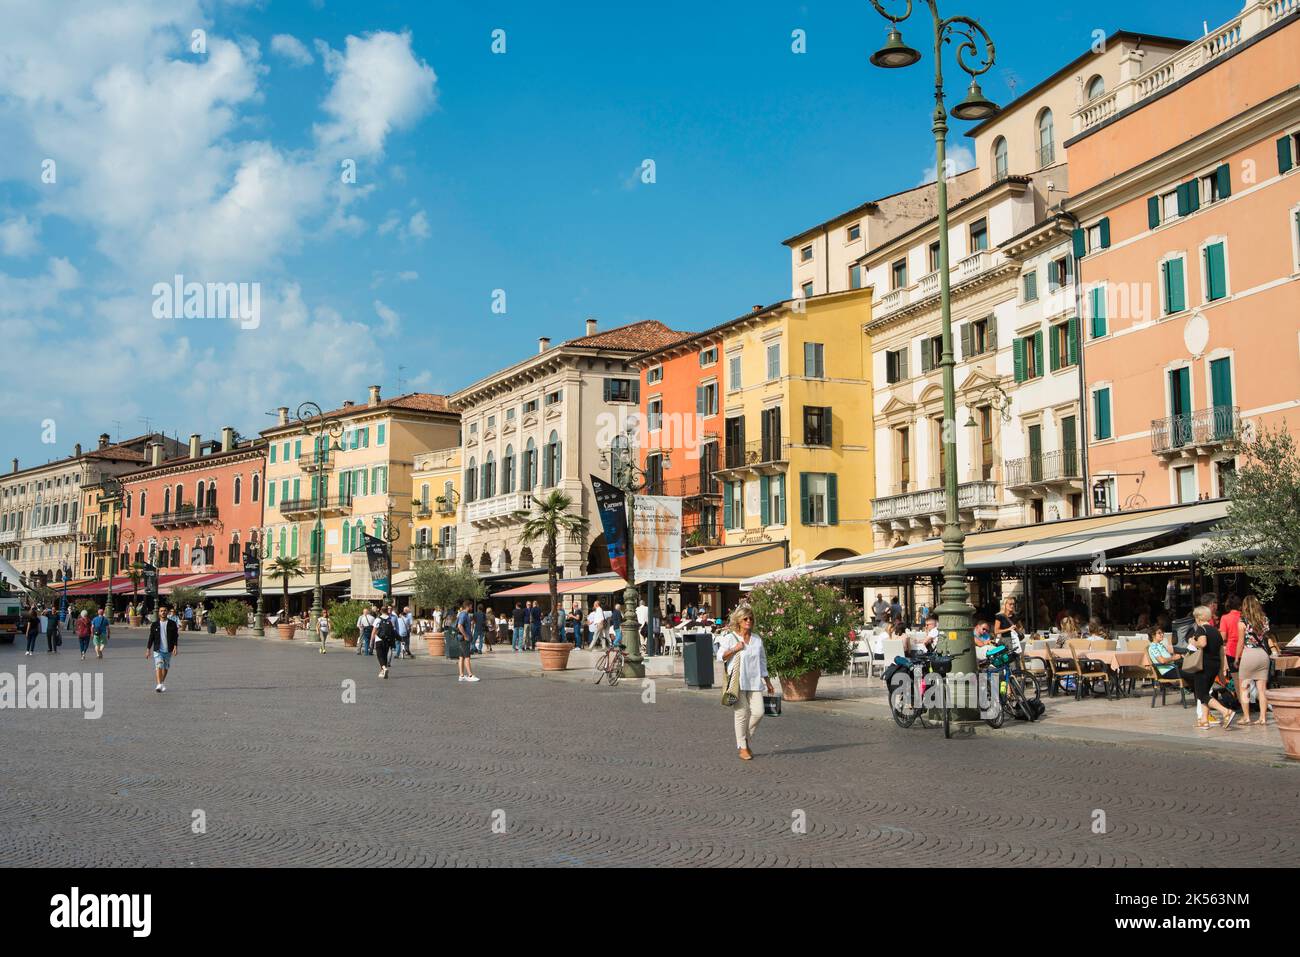 Piazza Bra Verona, view in summer of the western side of Piazza Bra, a colorful row of cafes and restaurants known as the Liston, Verona, Veneto Italy Stock Photo